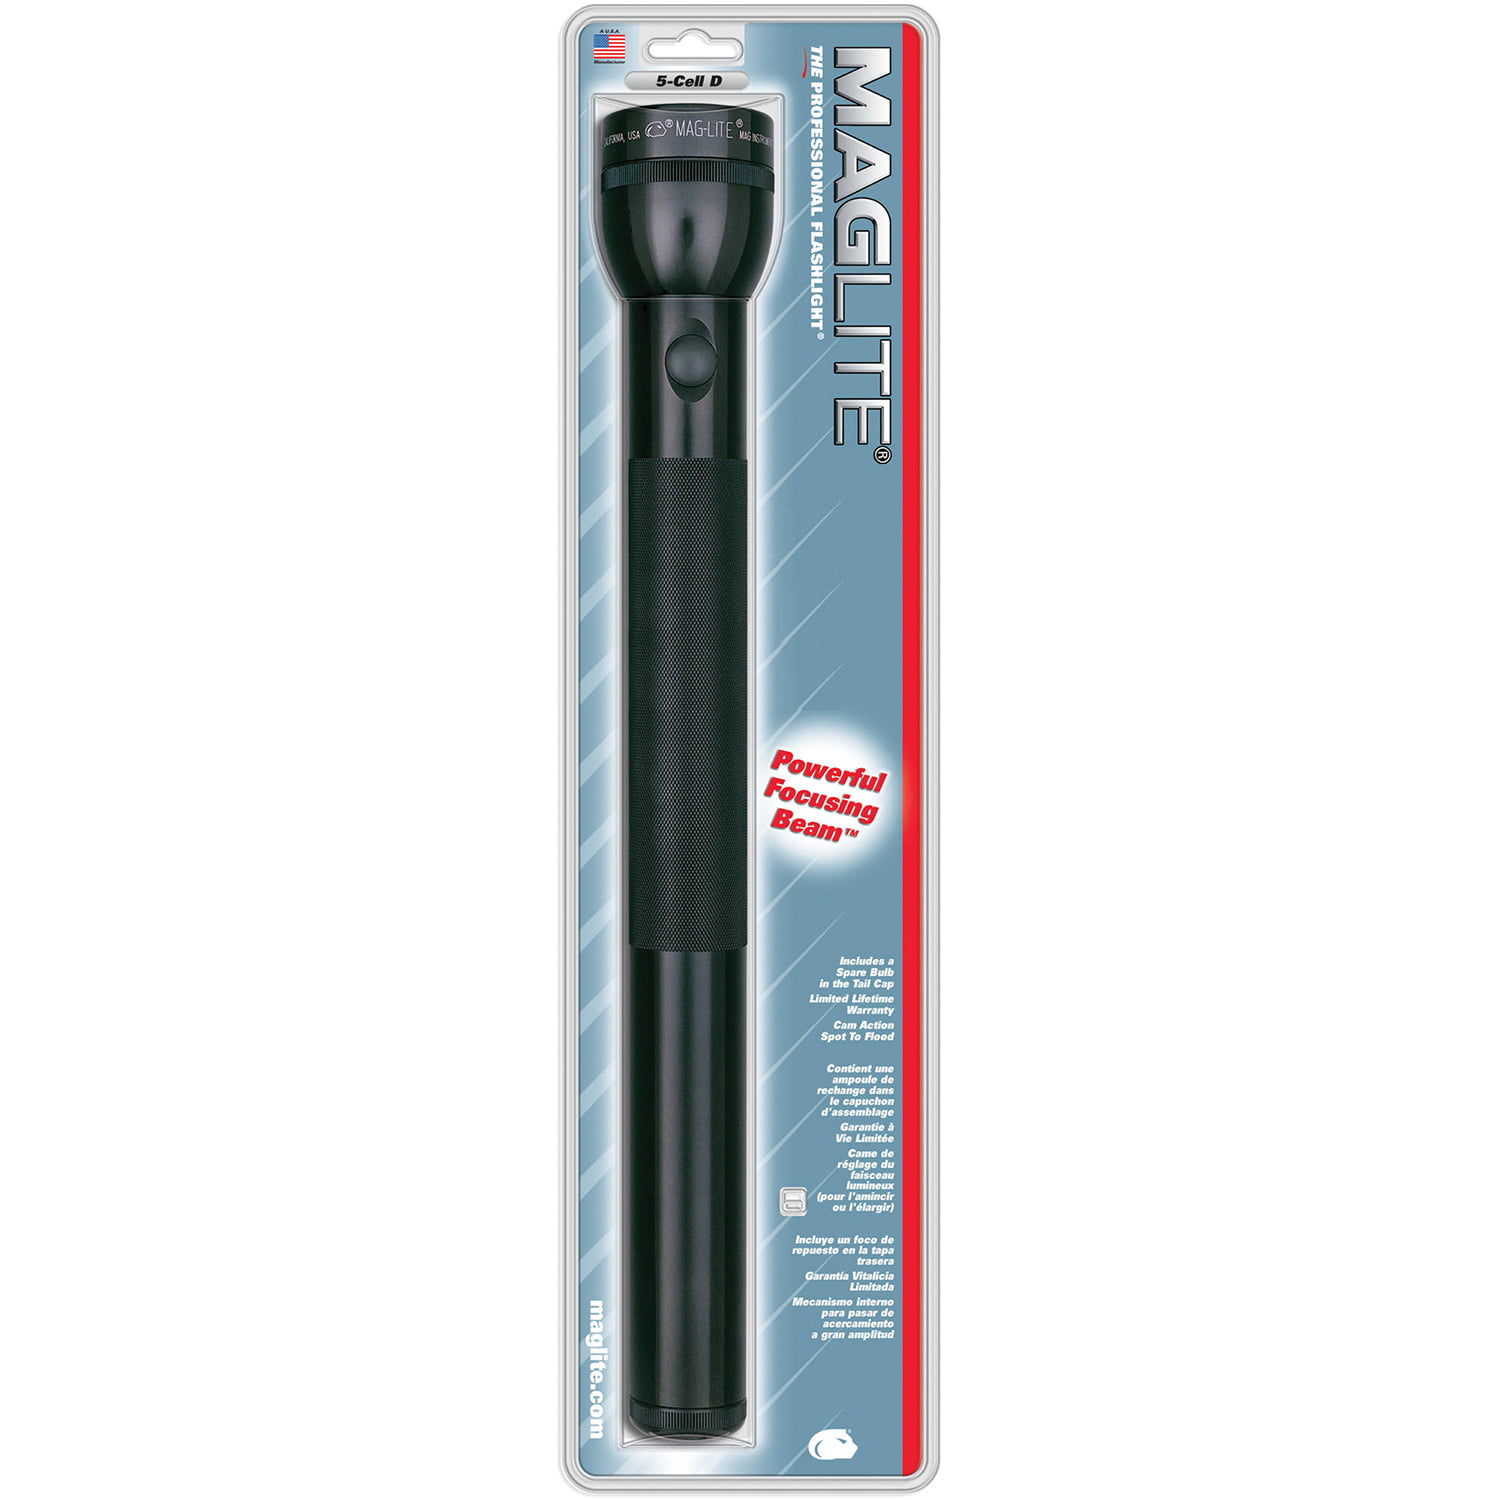 MagLite 5 Cell C /& D Magnum Star Flashlight Torch Bulb Replacement